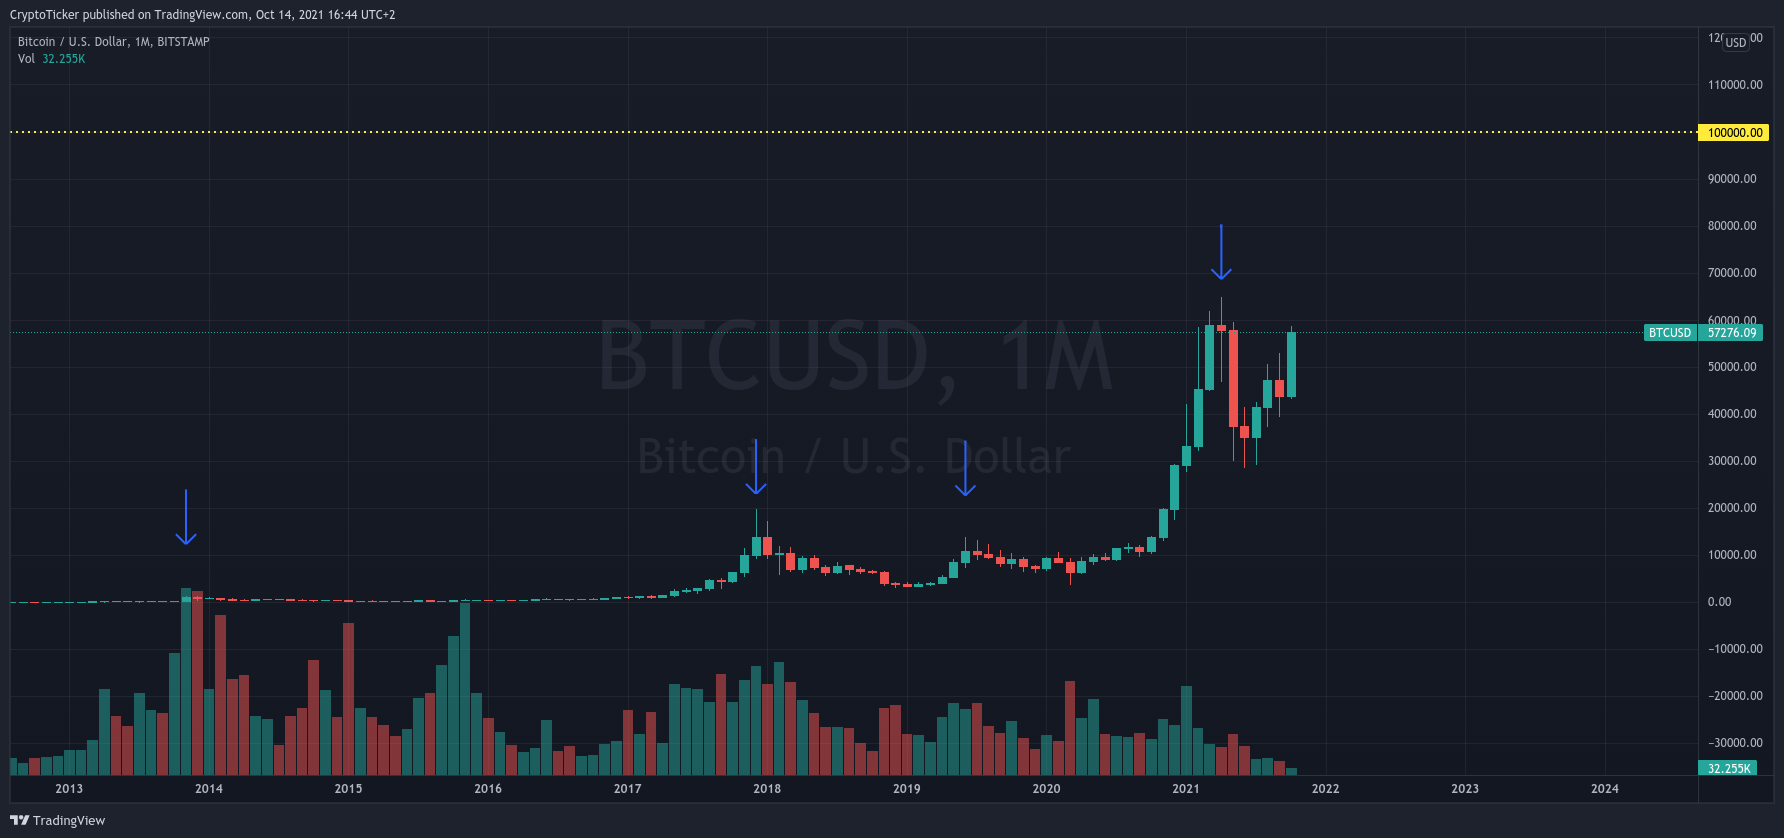 BTC/USD 1-month chart showing Bitcoin's repeated patterns